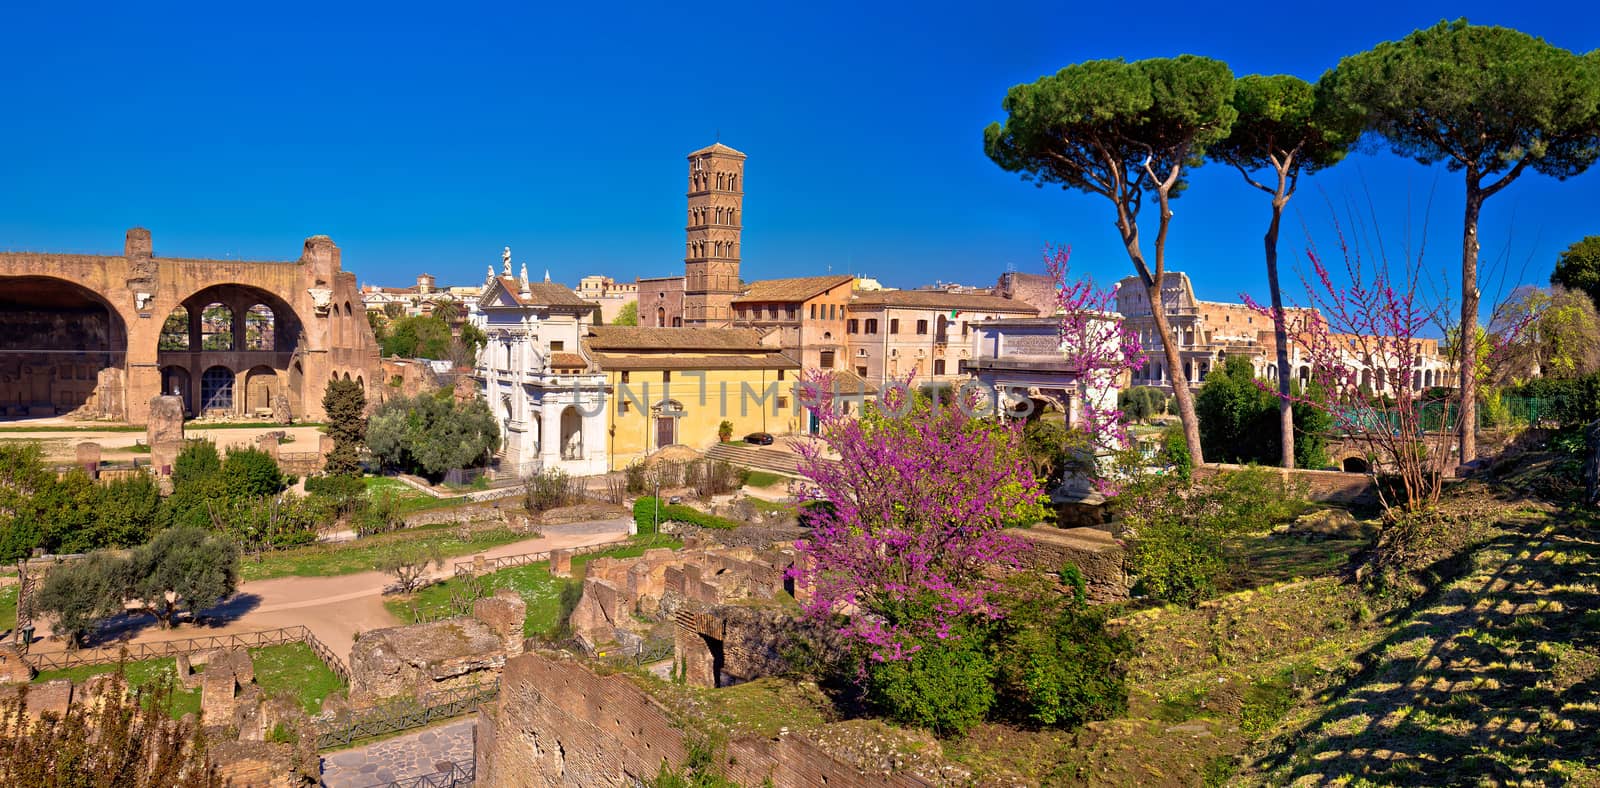 Scenic springtime panoramic view over the ruins of the Roman Forum in Rome, capital of Italy